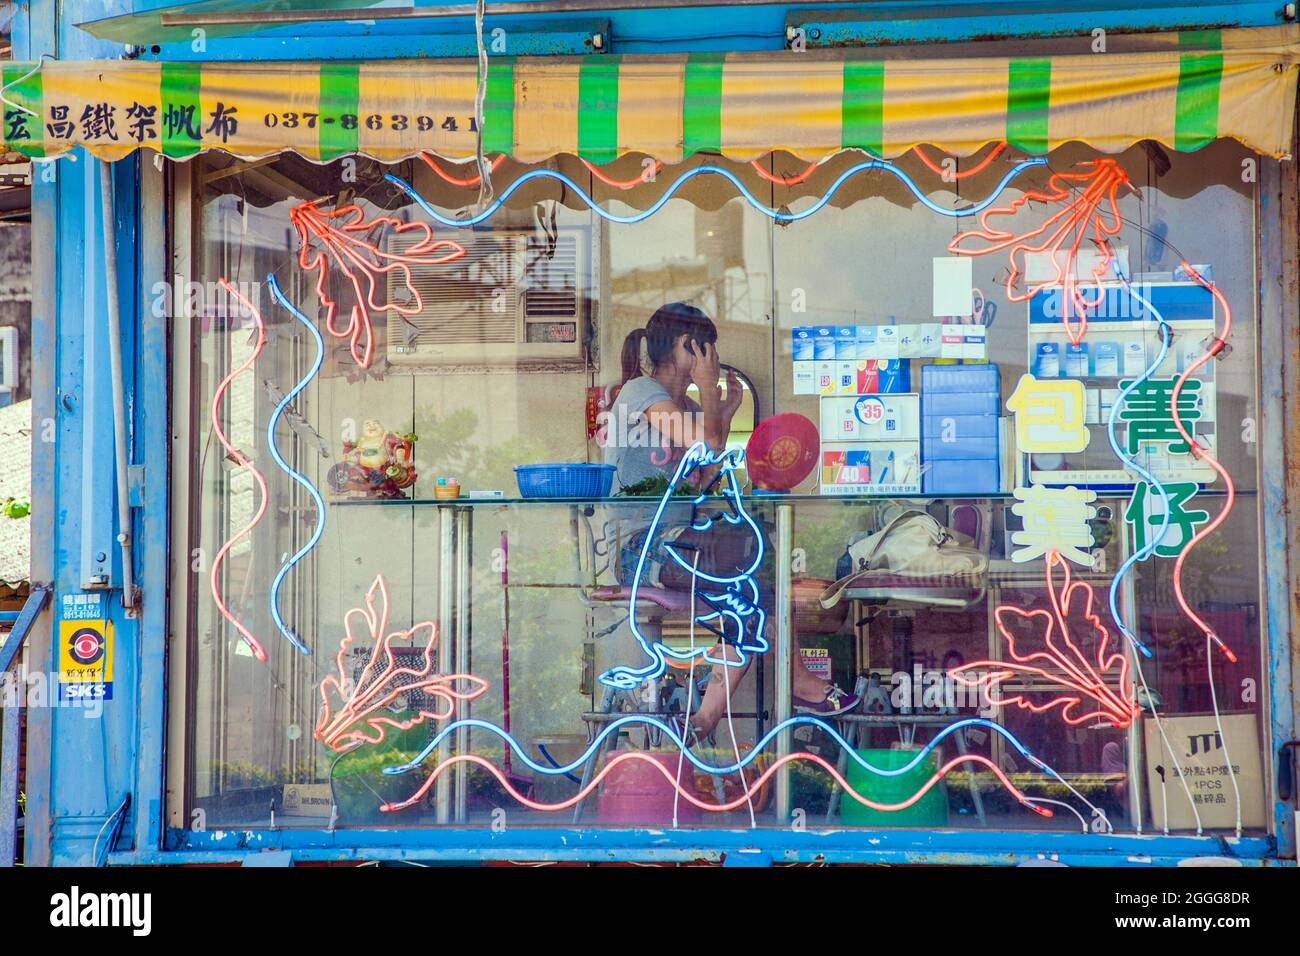 Glass kiosk at side of highway selling betel nut leaf from betel nut beauty (binlang girl), Caotun, Taiwan Stock Photo